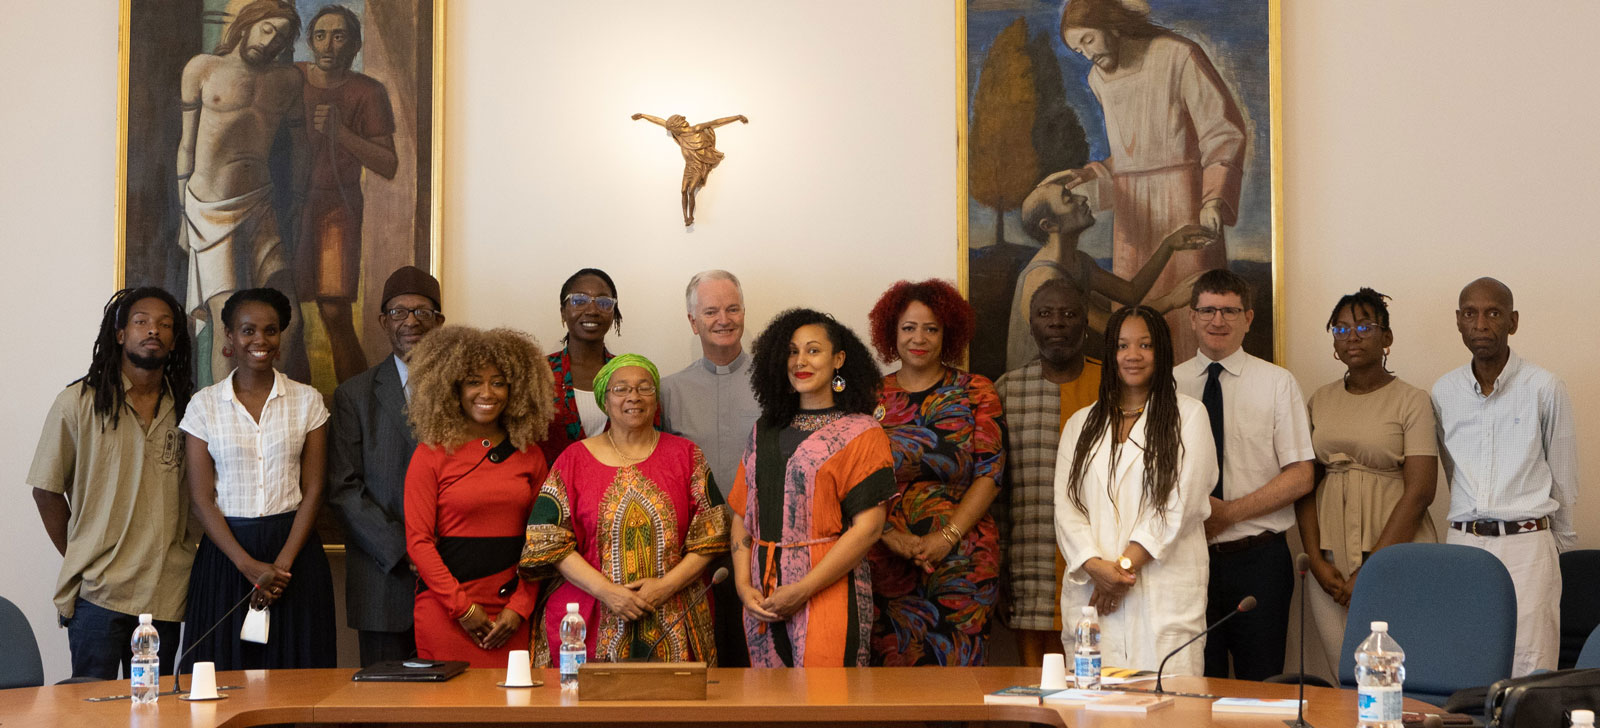 Members of the Global Circle for Reparations and Healing (GCRH) that met with the Vatican